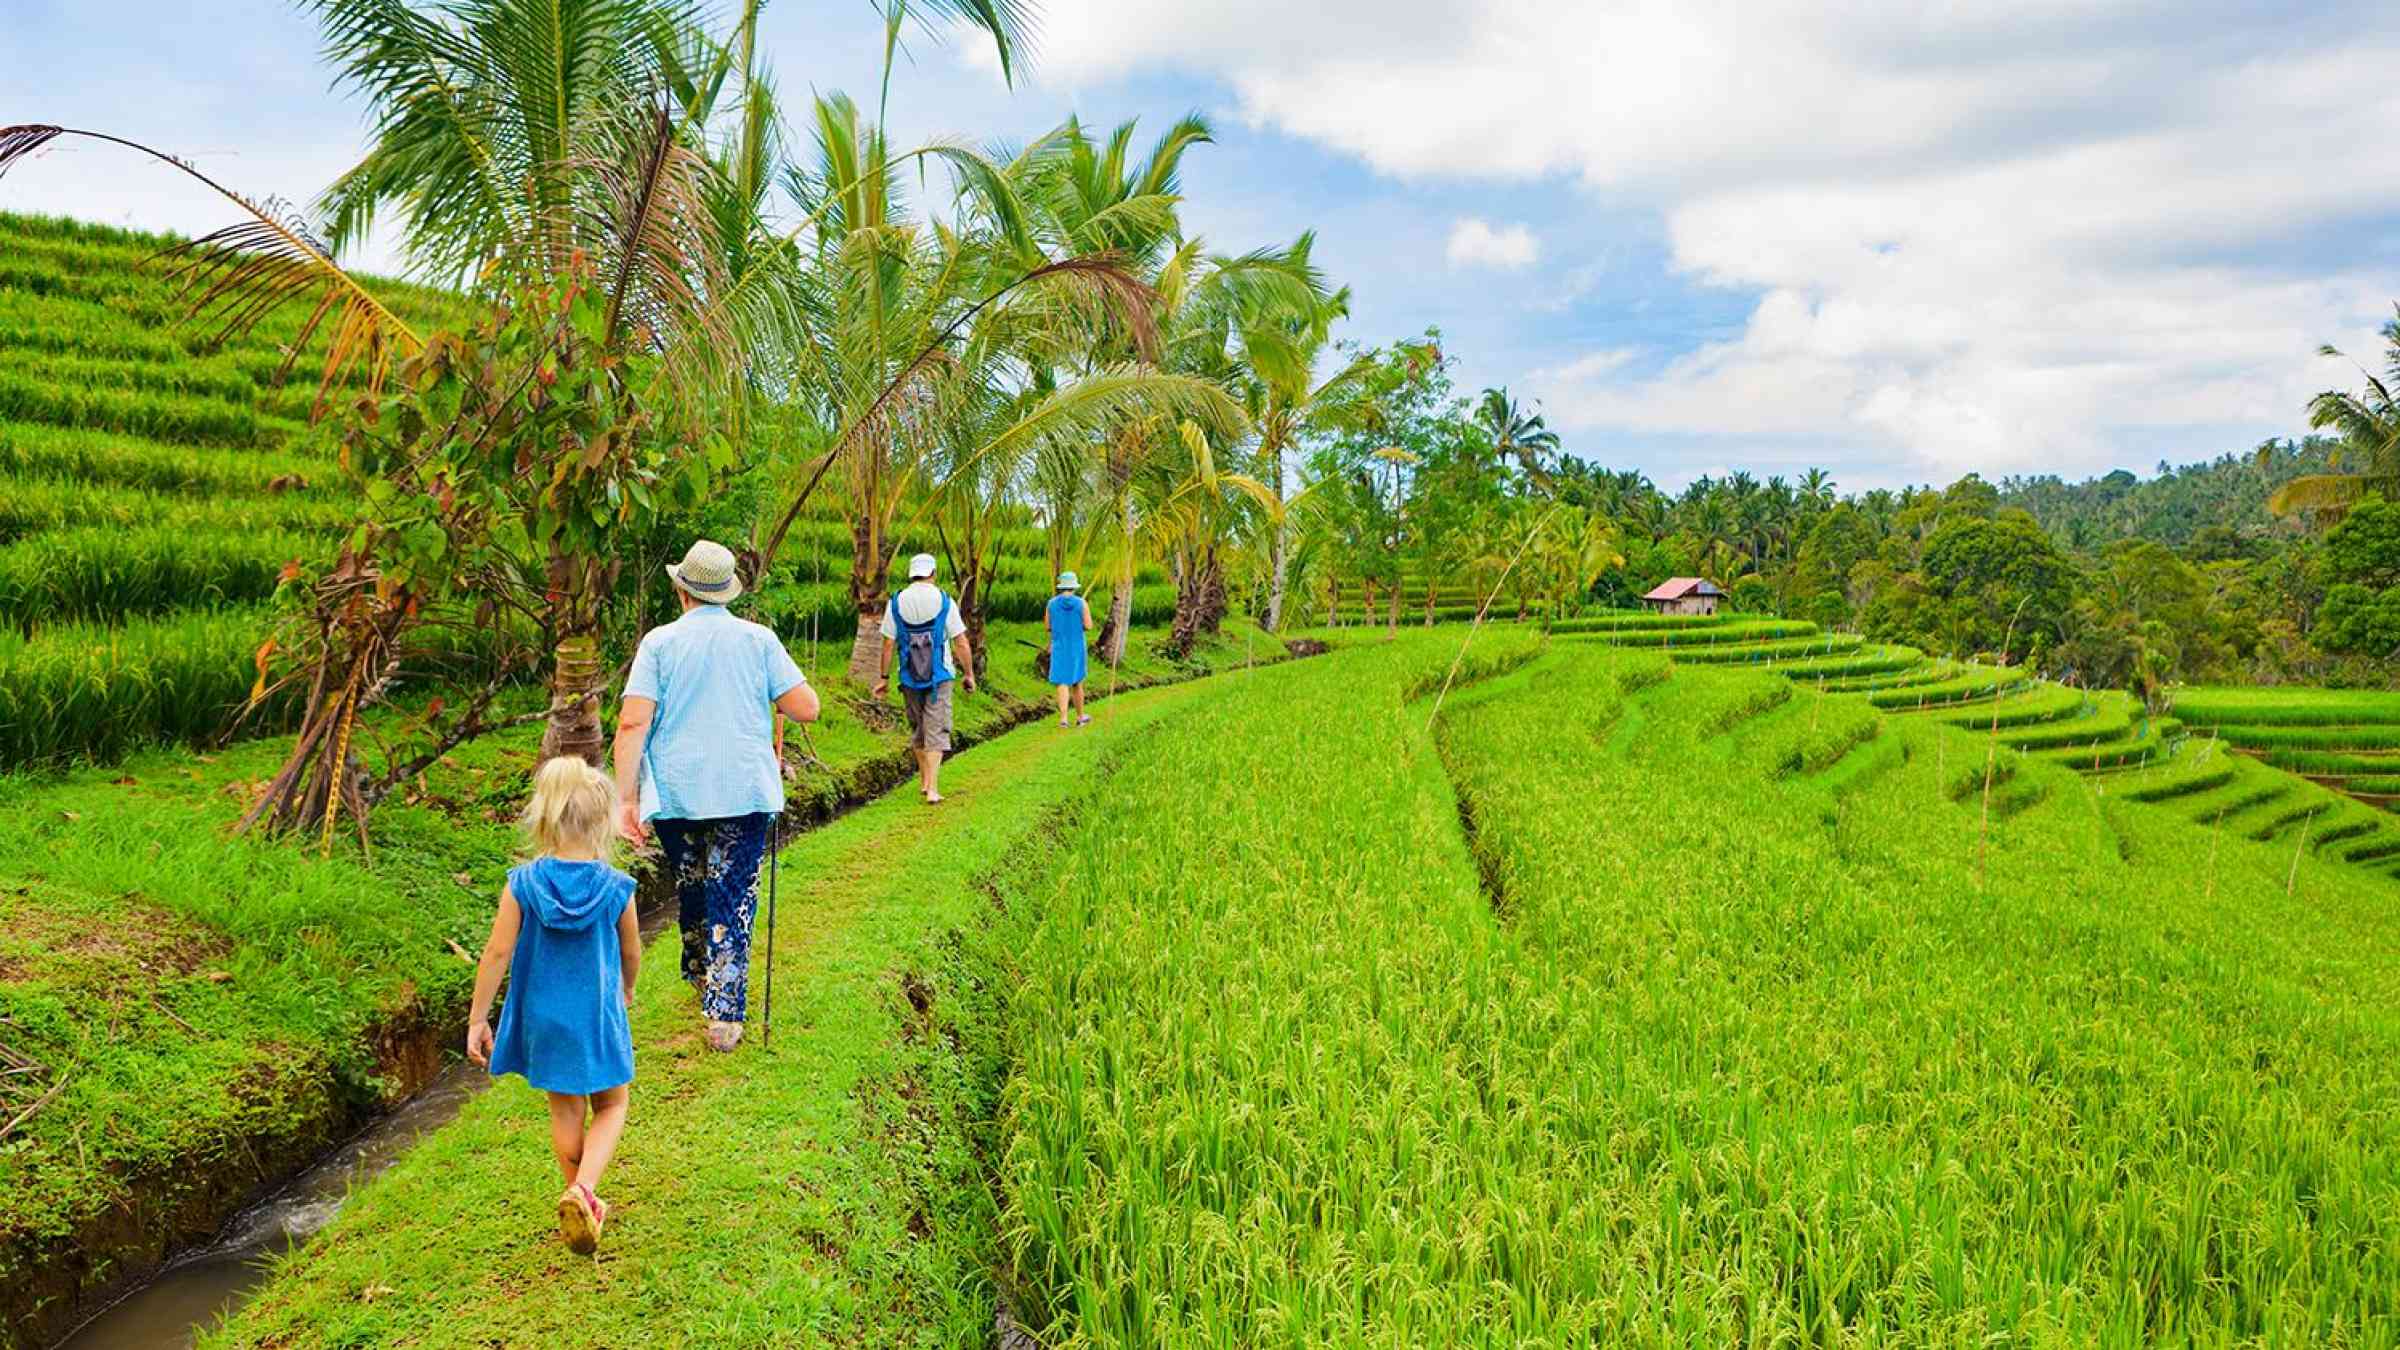 Group of people walking over green rice fields.